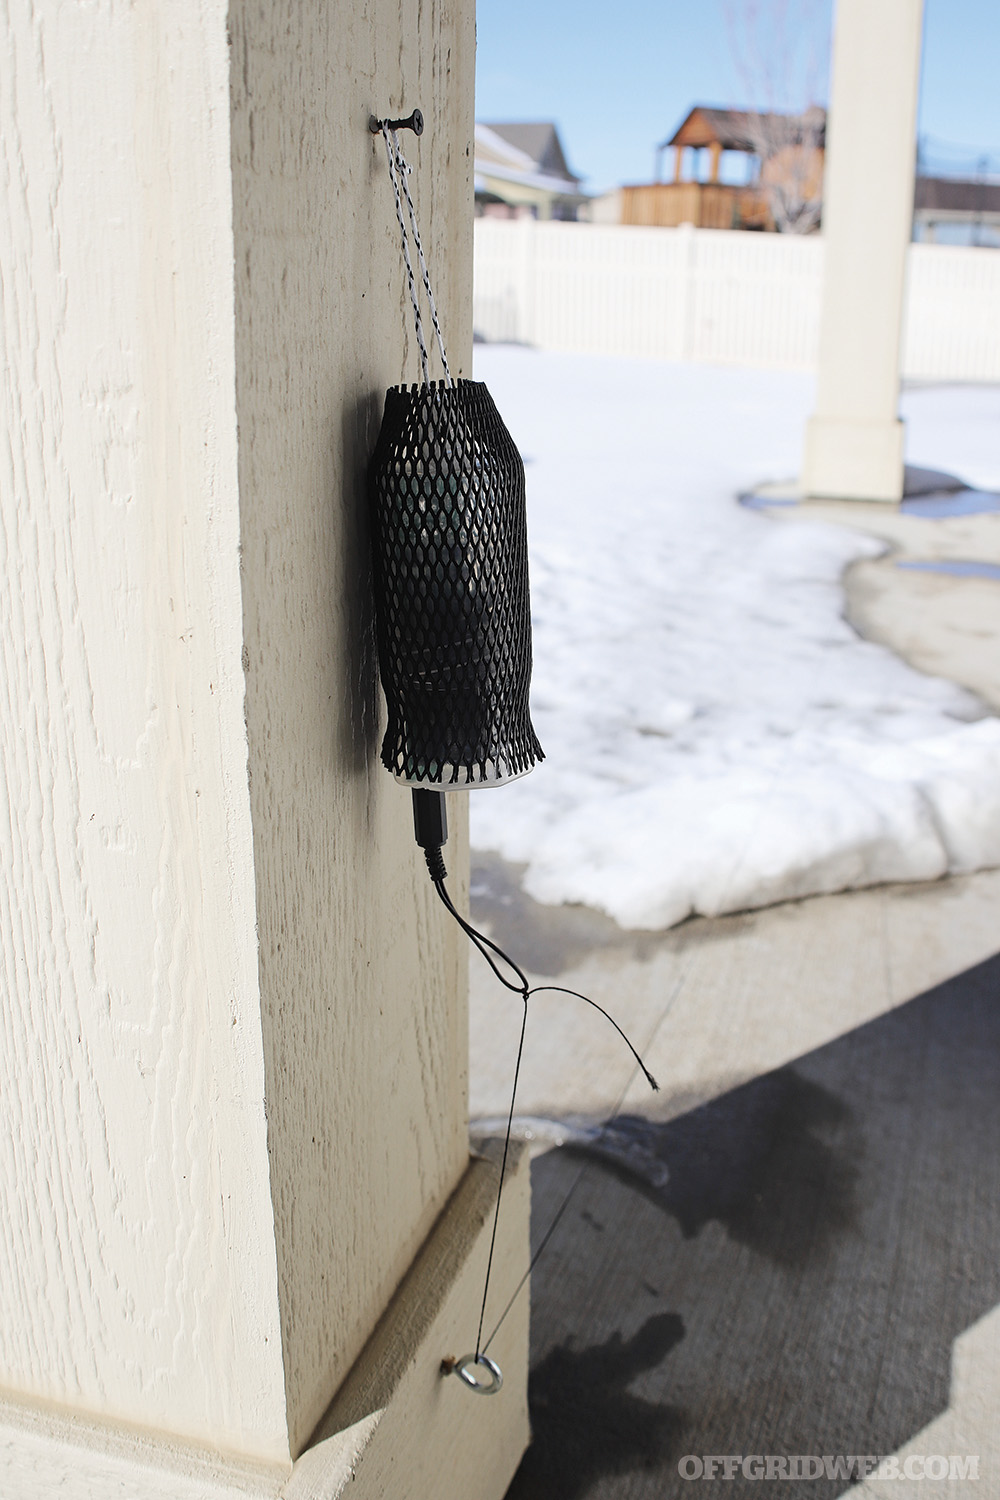 Buyer’s Guide: Perimeter Defense Tools for Home Security